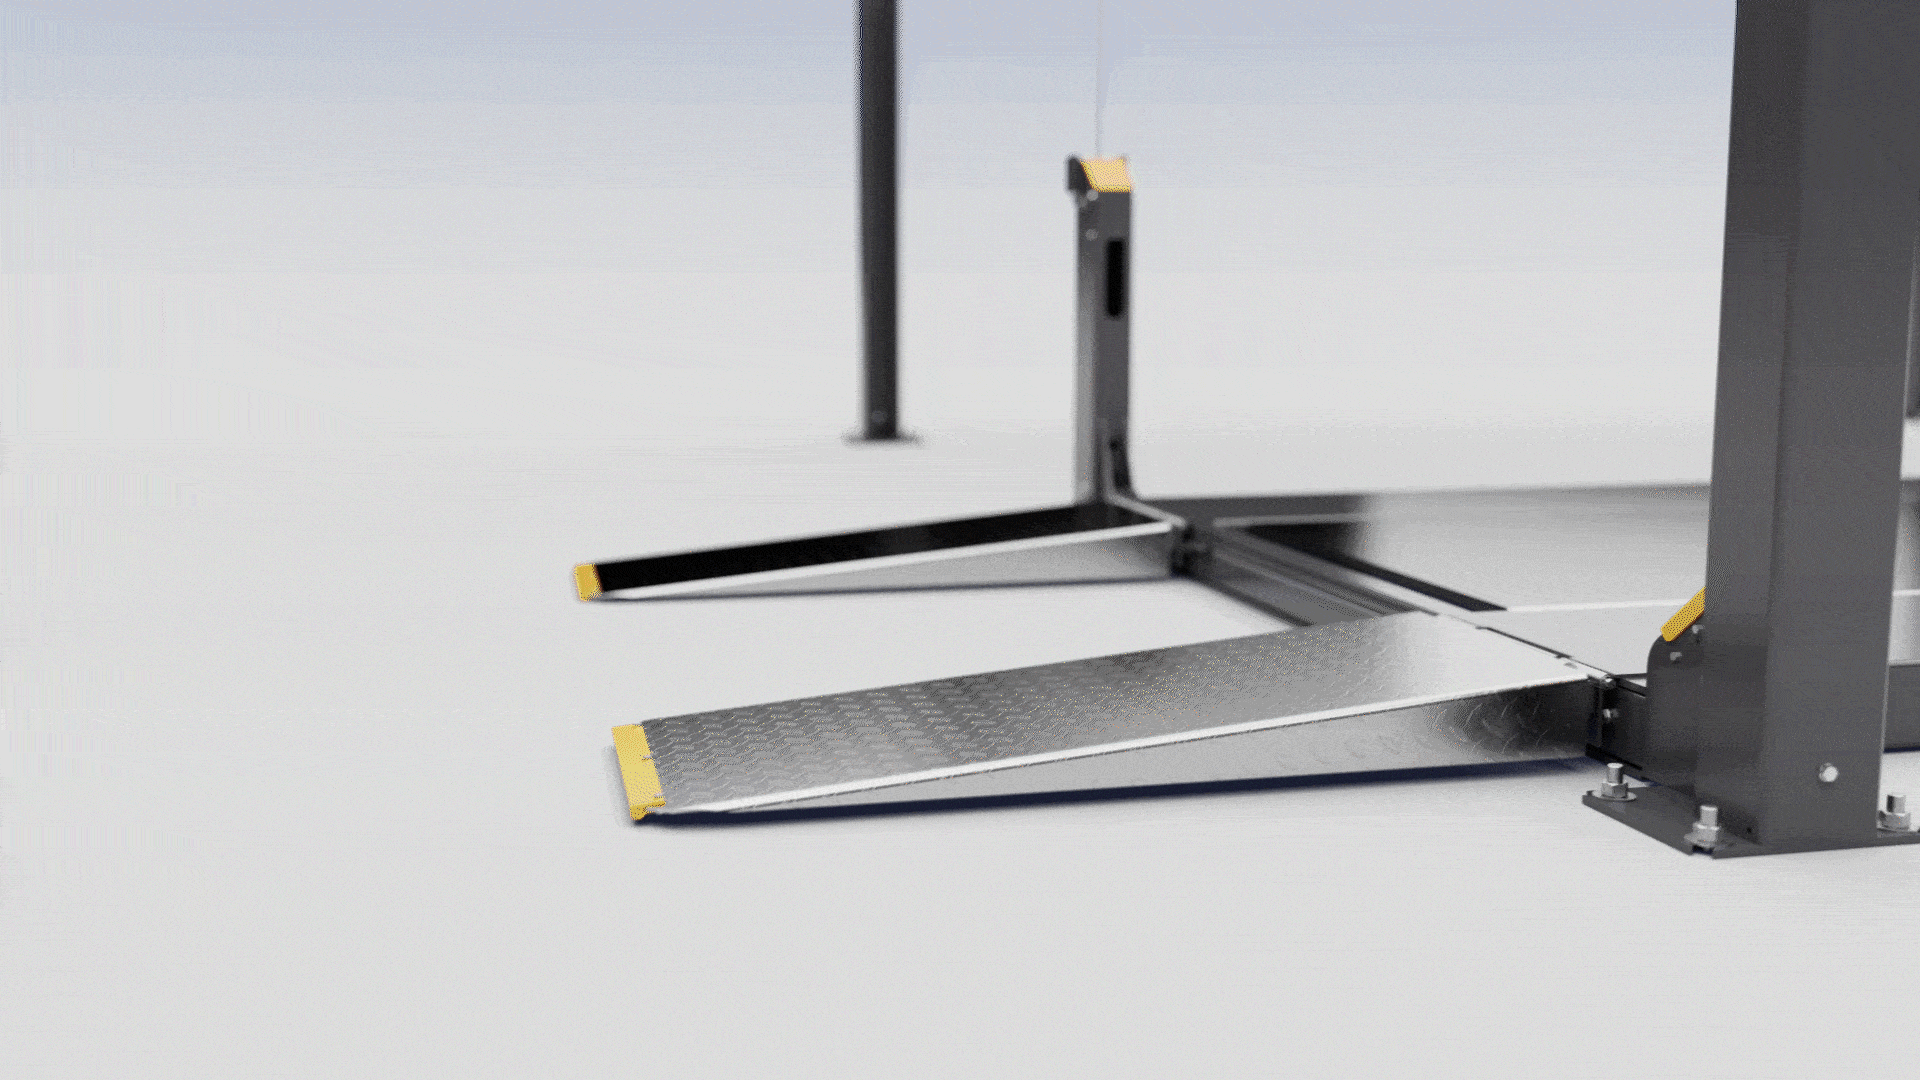 3D animation and renders of car lifts